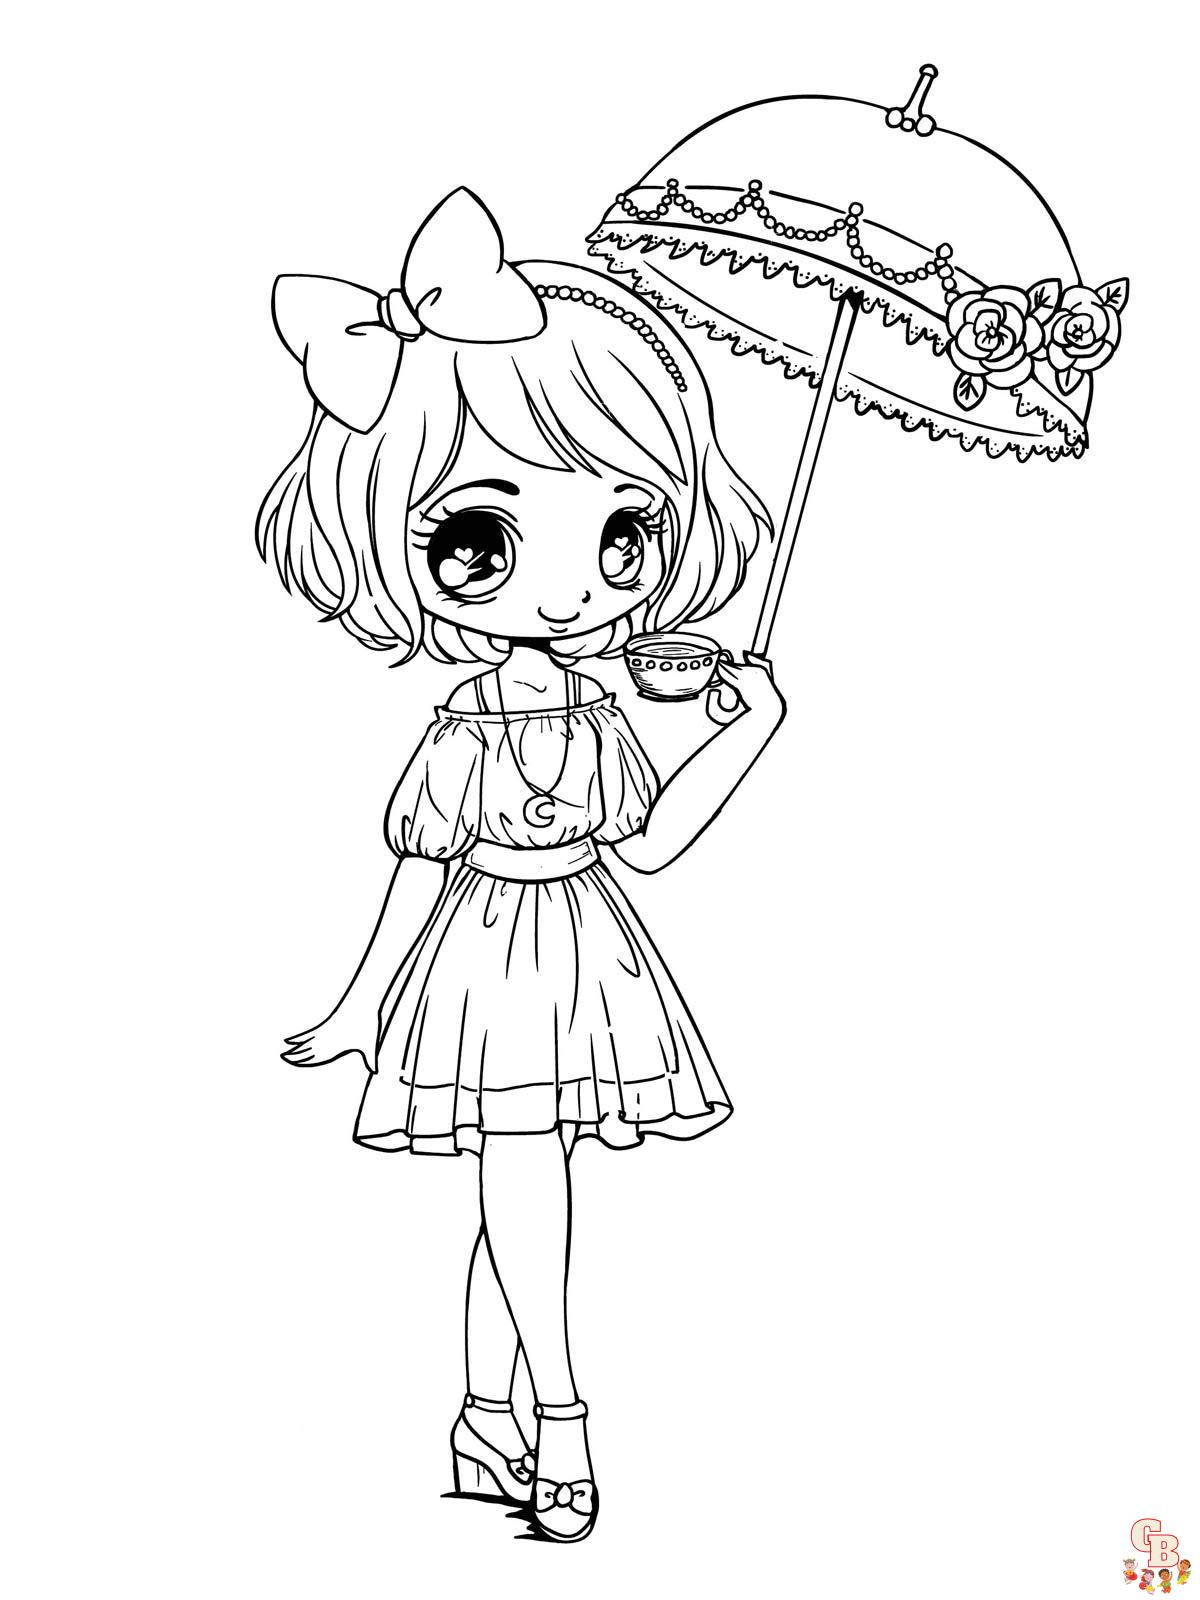 Anime Girl Coloring Pages 26673033 Stock Photo at Vecteezy